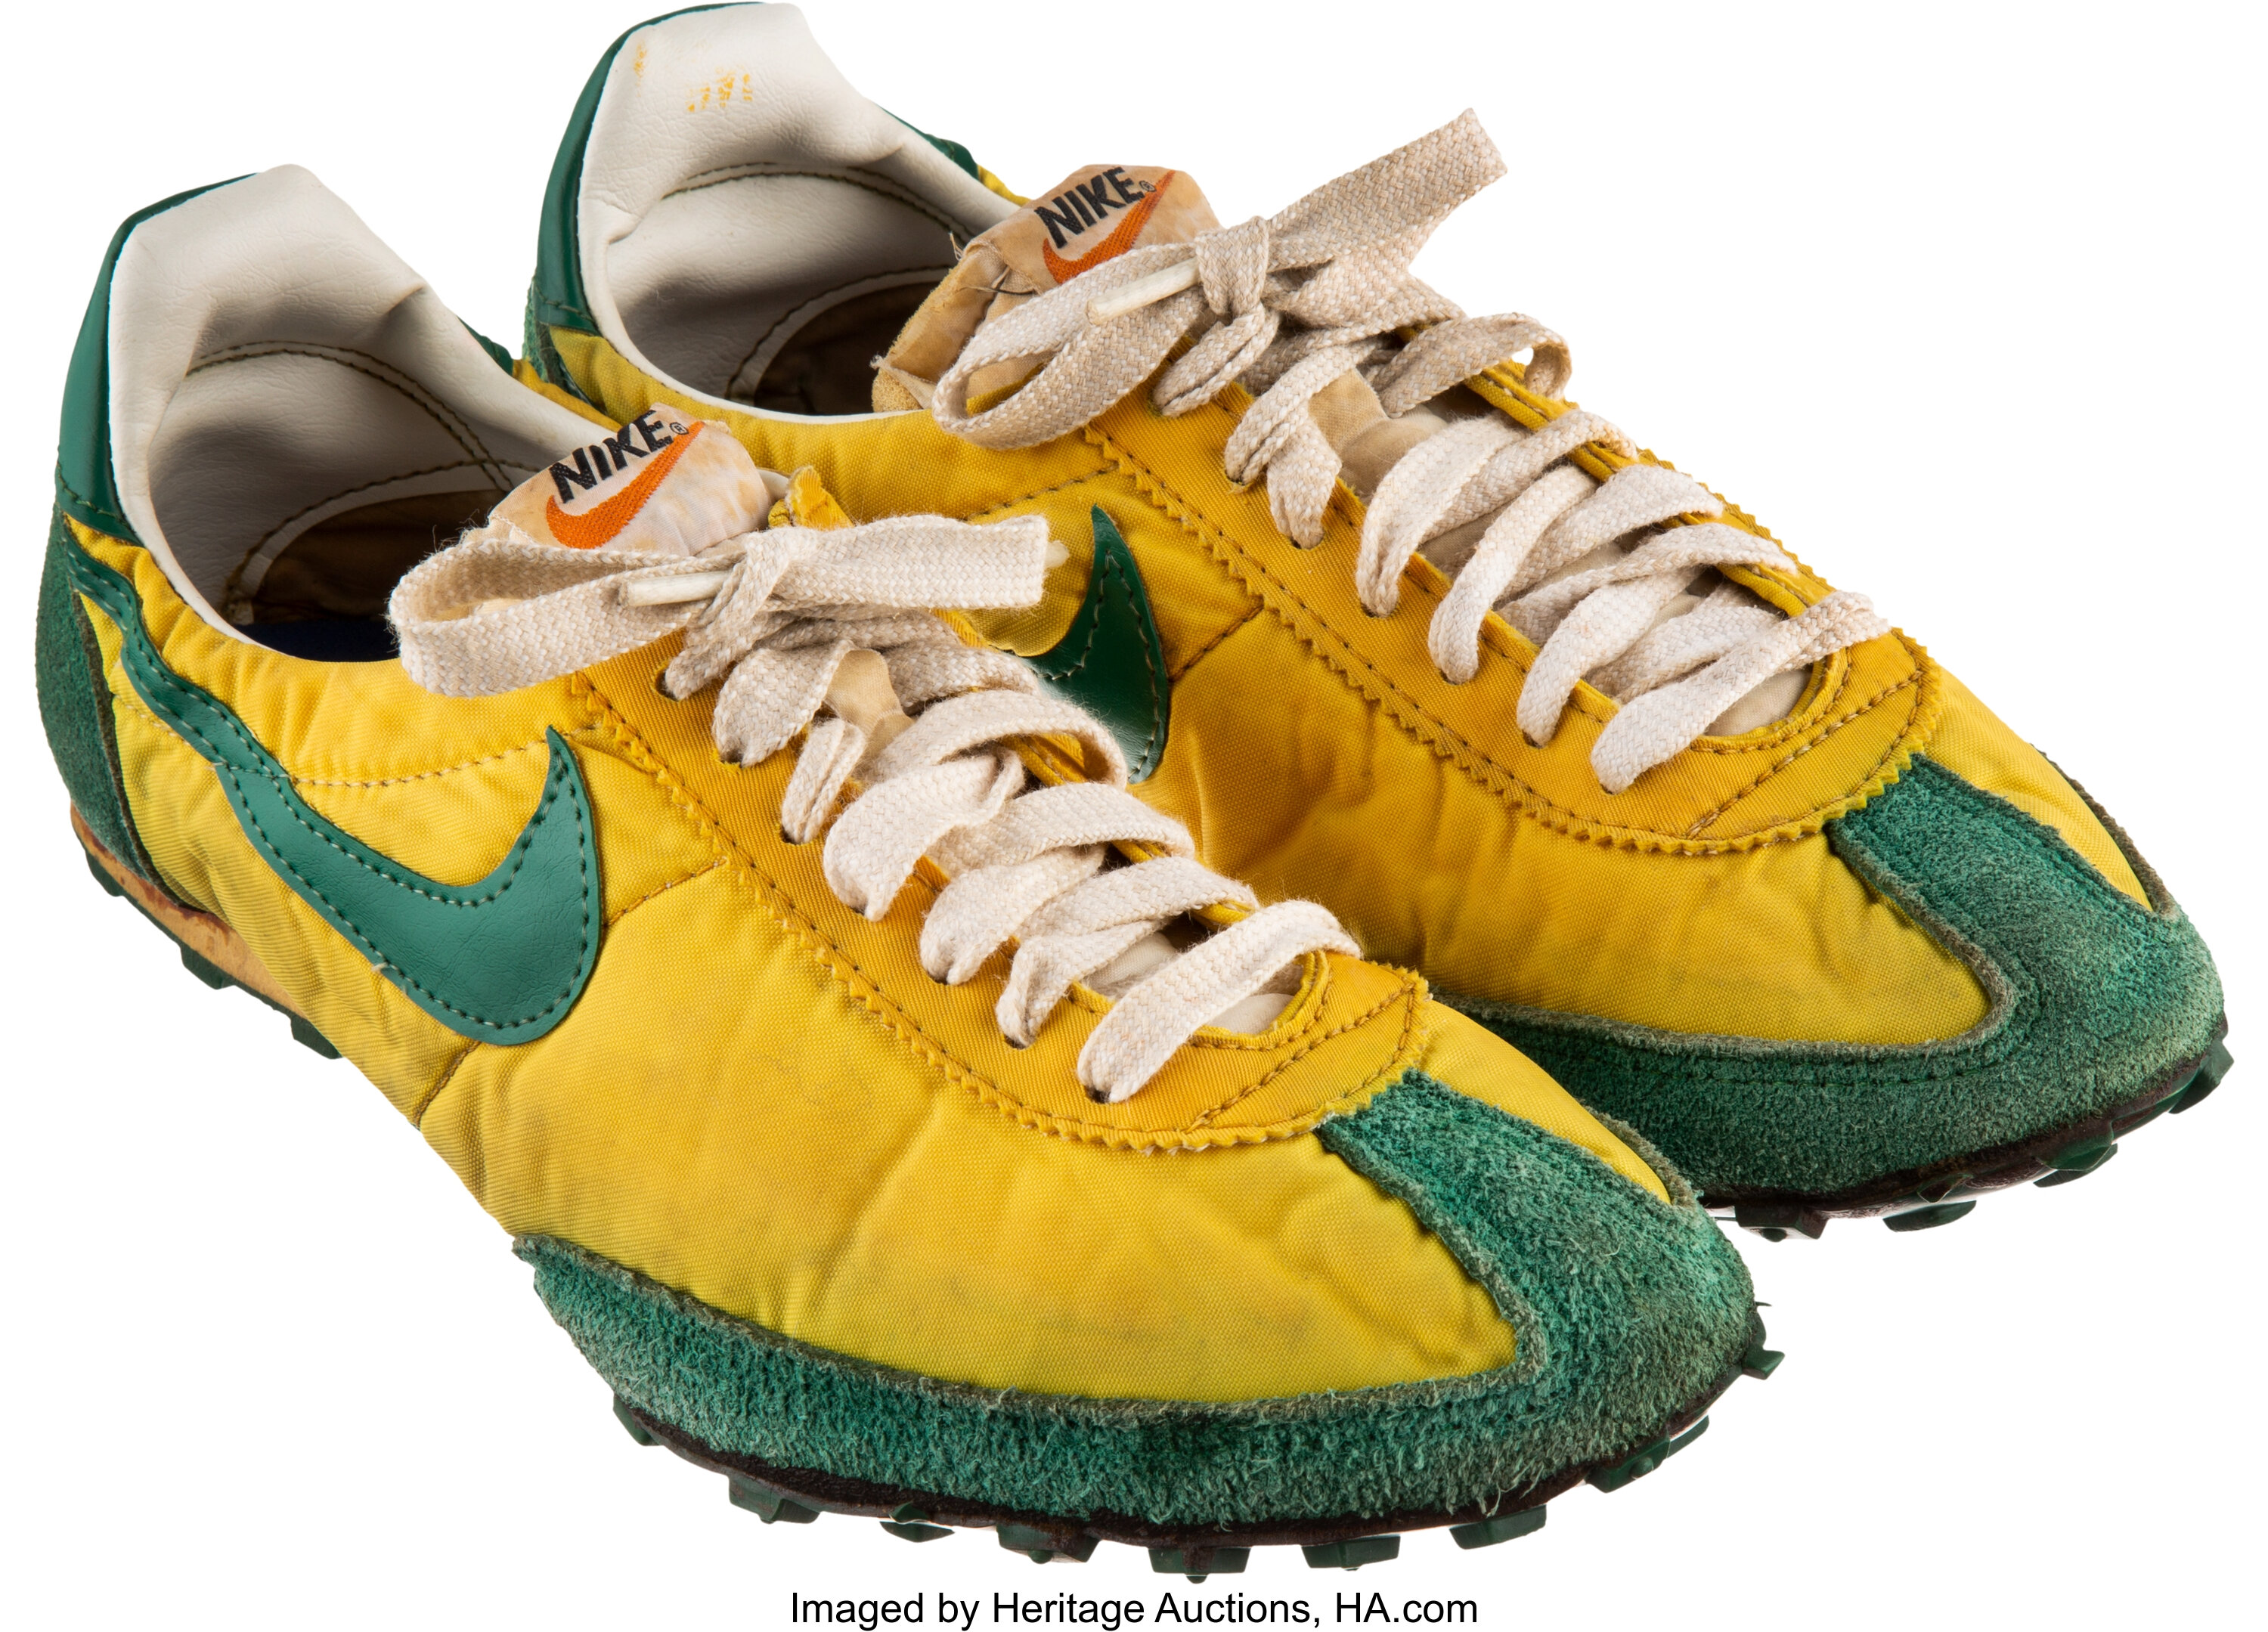 1974 Original Nike "Waffle Trainers" Miscellaneous | Lot #50992 Heritage Auctions